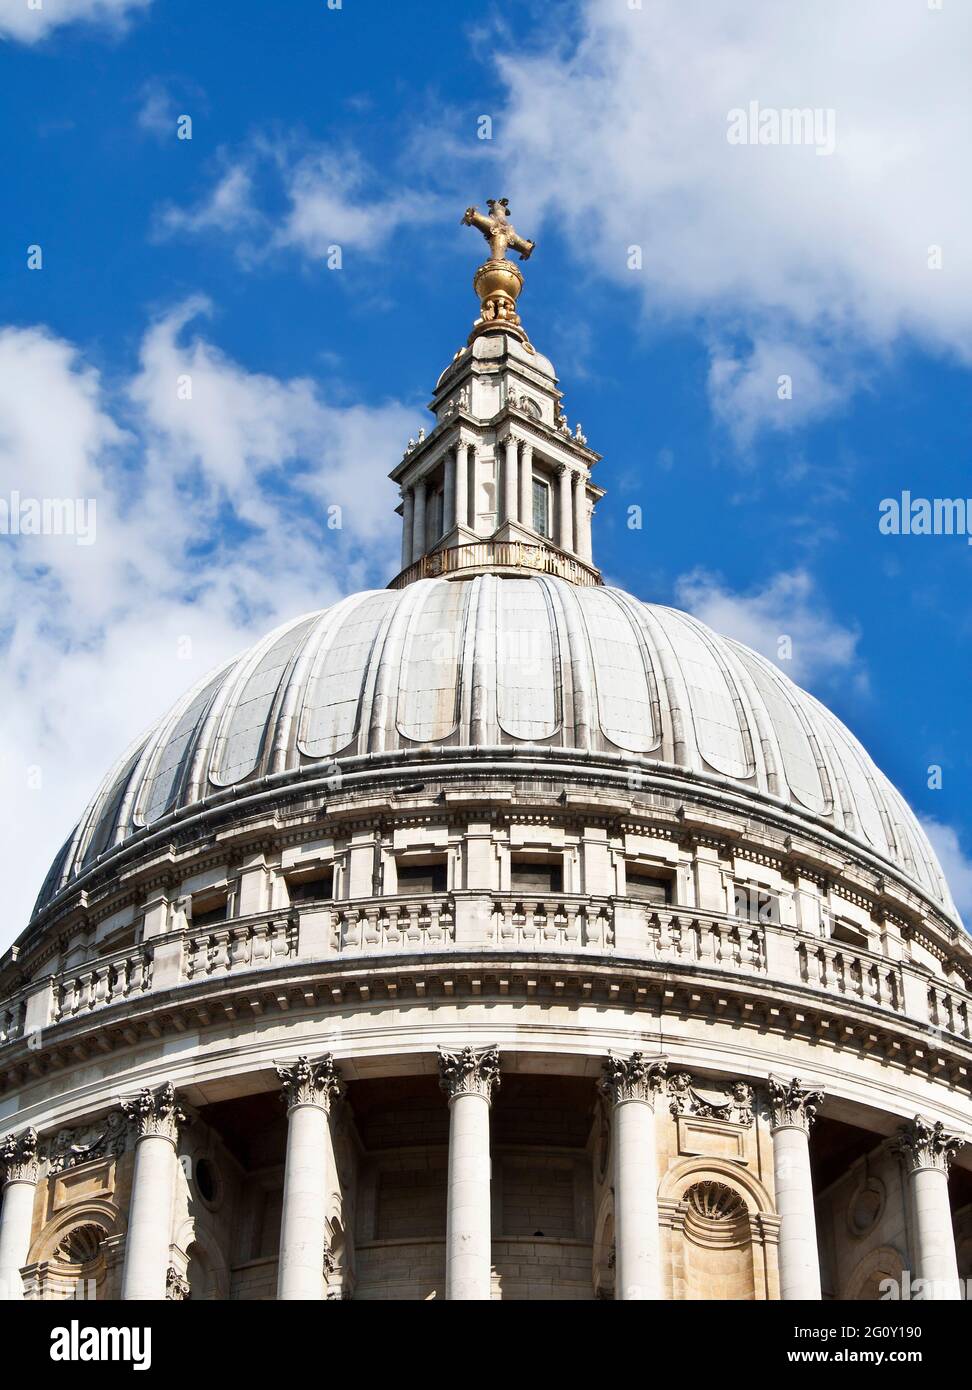 Close-up image of the dome of St Paul's Cathedral, the seat of the Bishop of London Stock Photo